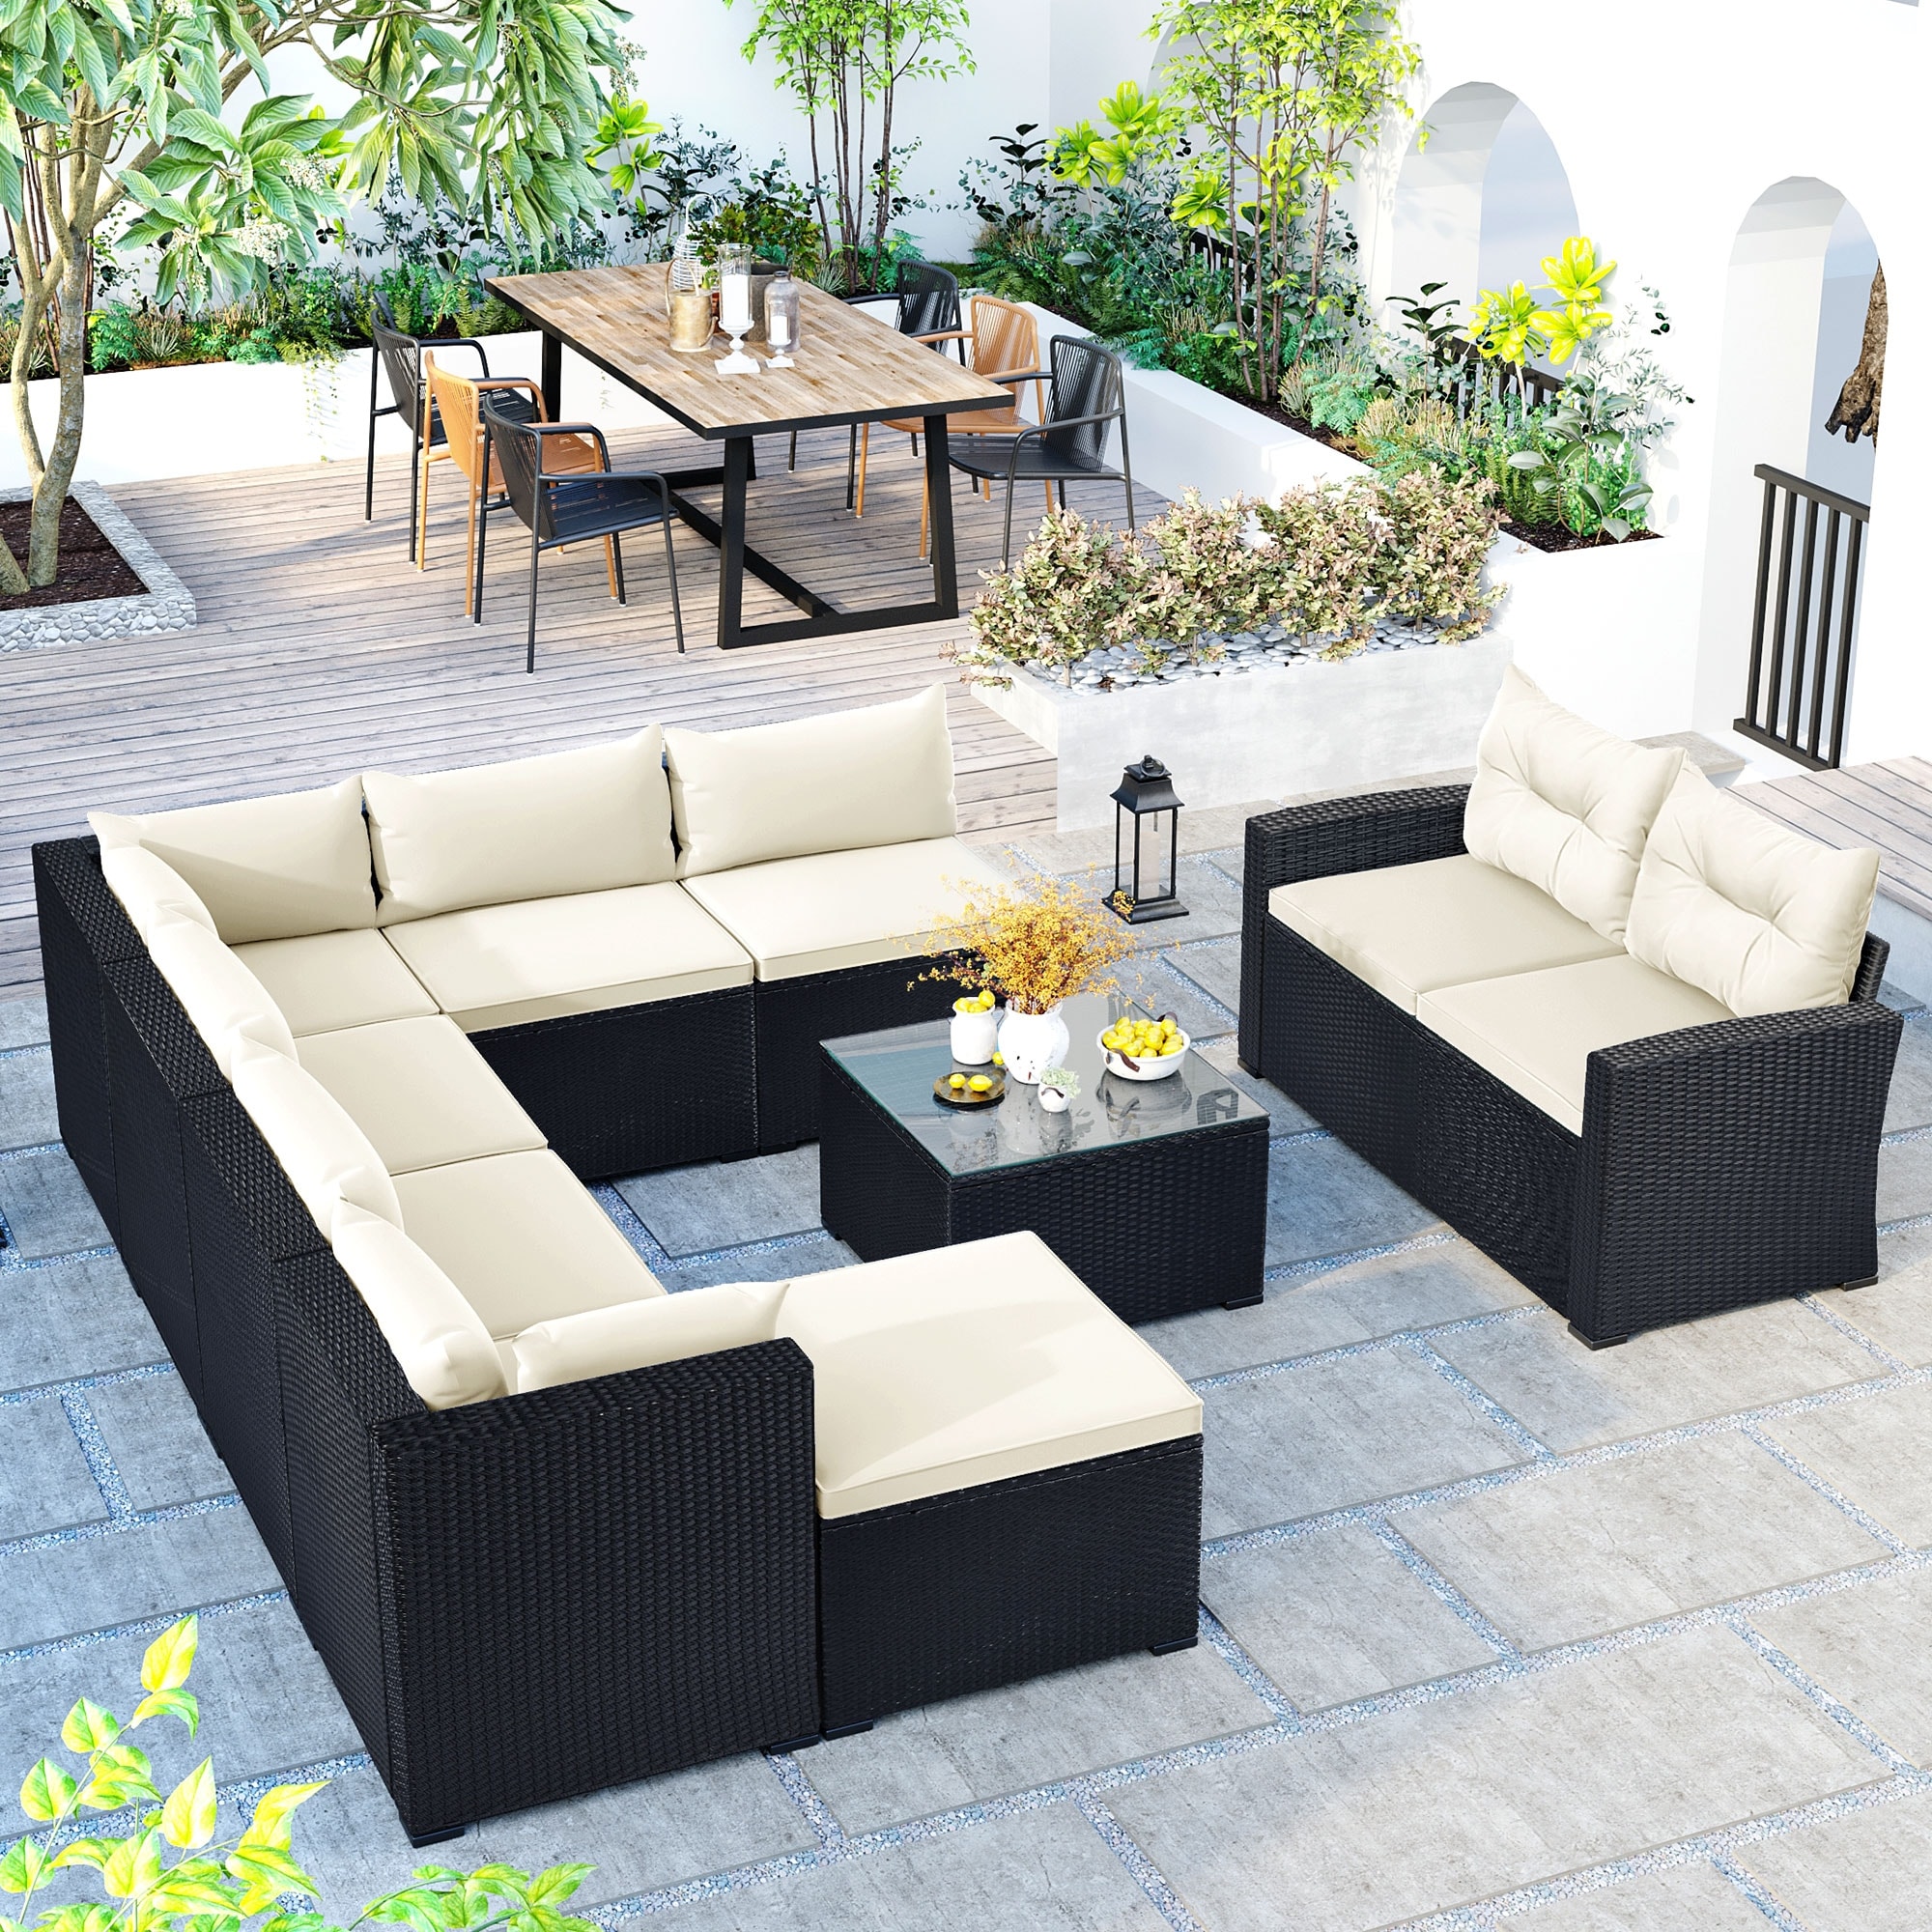 6-piece Sectional Conversation Patio Set  Features Removeable Cushions and Tempered Glass Tabletop For Ultimate Comfort.